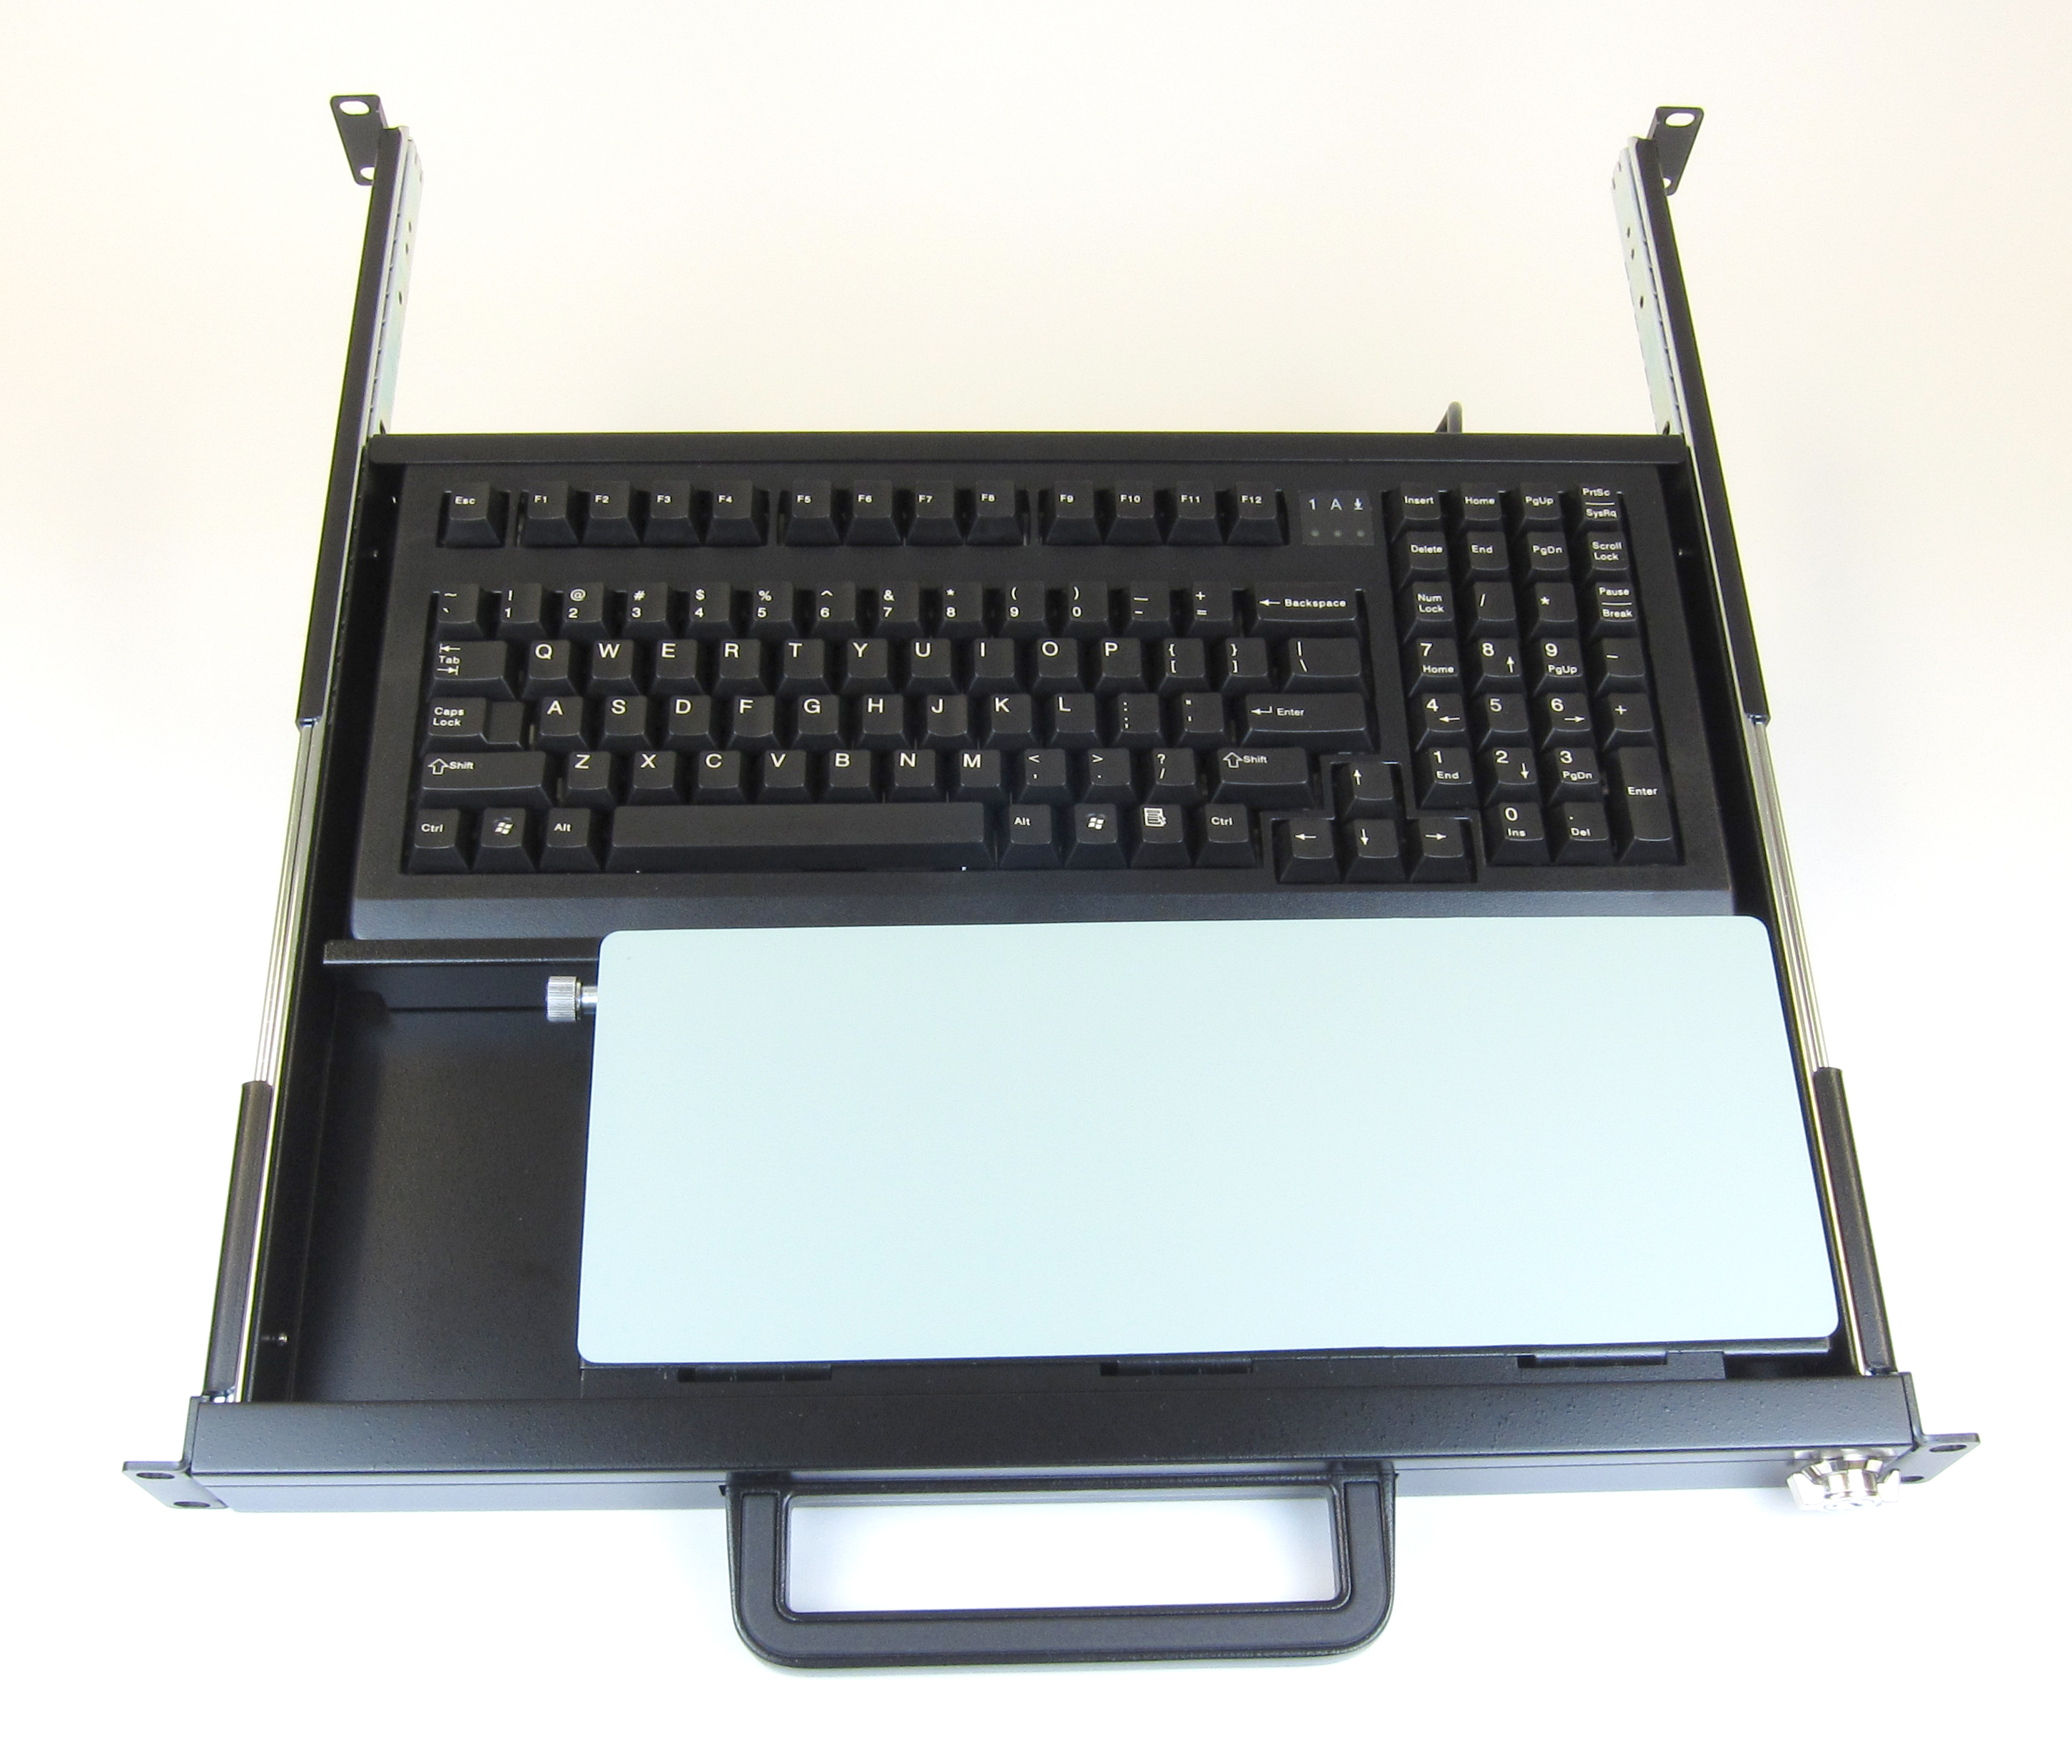 AD-624P-B 1U Rack Mount Keyboard with Mouse Pad Top